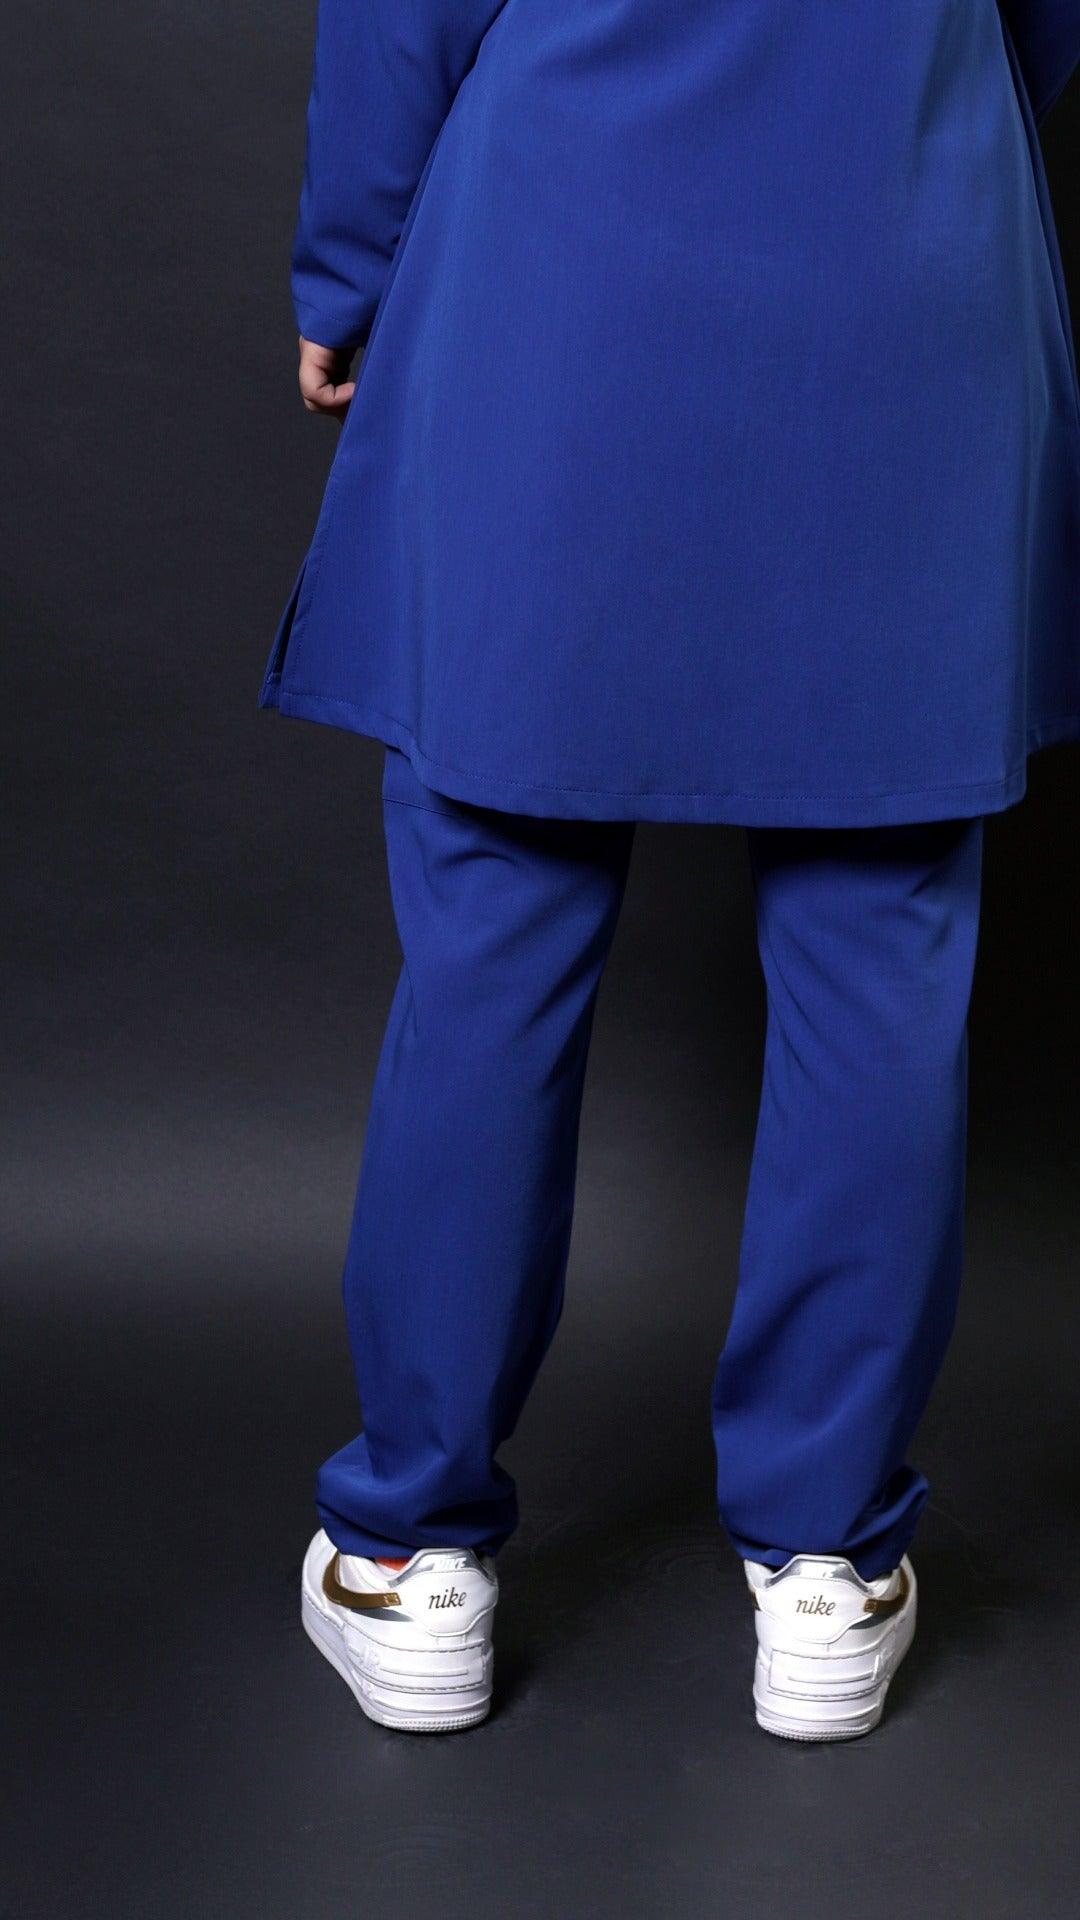 These royal blue scrub pants are straight cut and feature 6 pockets, 2 of which are cargo pockets. They're perfect for carrying all of your essential items with you while you're on the job.